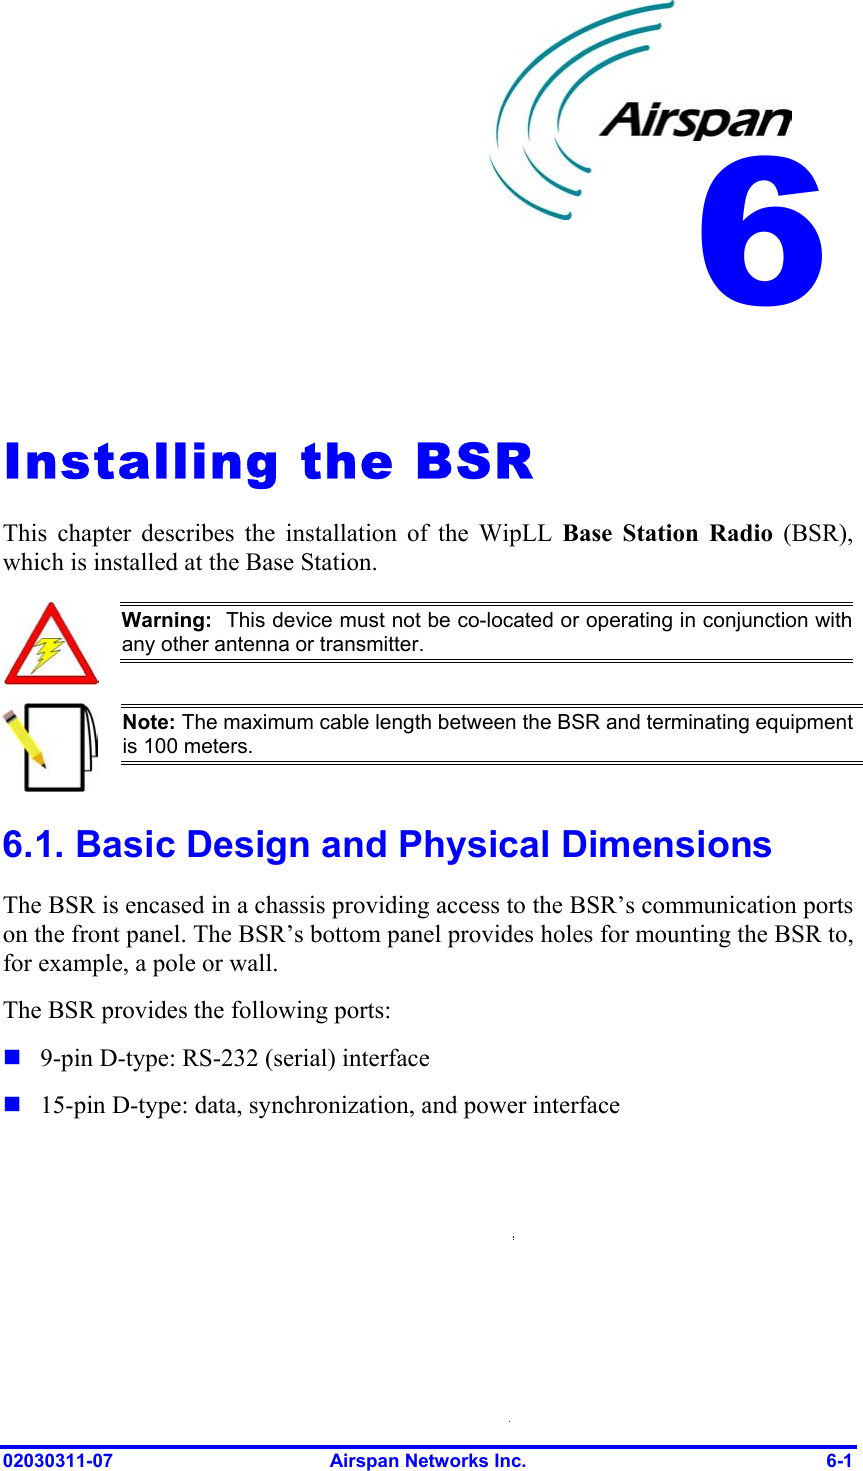  6   Installing the BSR This chapter describes the installation of the WipLL Base Station Radio (BSR), which is installed at the Base Station.  Warning:  This device must not be co-located or operating in conjunction with any other antenna or transmitter.  Note: The maximum cable length between the BSR and terminating equipment is 100 meters. 6.1. Basic Design and Physical Dimensions The BSR is encased in a chassis providing access to the BSR’s communication ports on the front panel. The BSR’s bottom panel provides holes for mounting the BSR to, for example, a pole or wall. The BSR provides the following ports:   9-pin D-type: RS-232 (serial) interface 15-pin D-type: data, synchronization, and power interface 02030311-07  Airspan Networks Inc.  6-1 